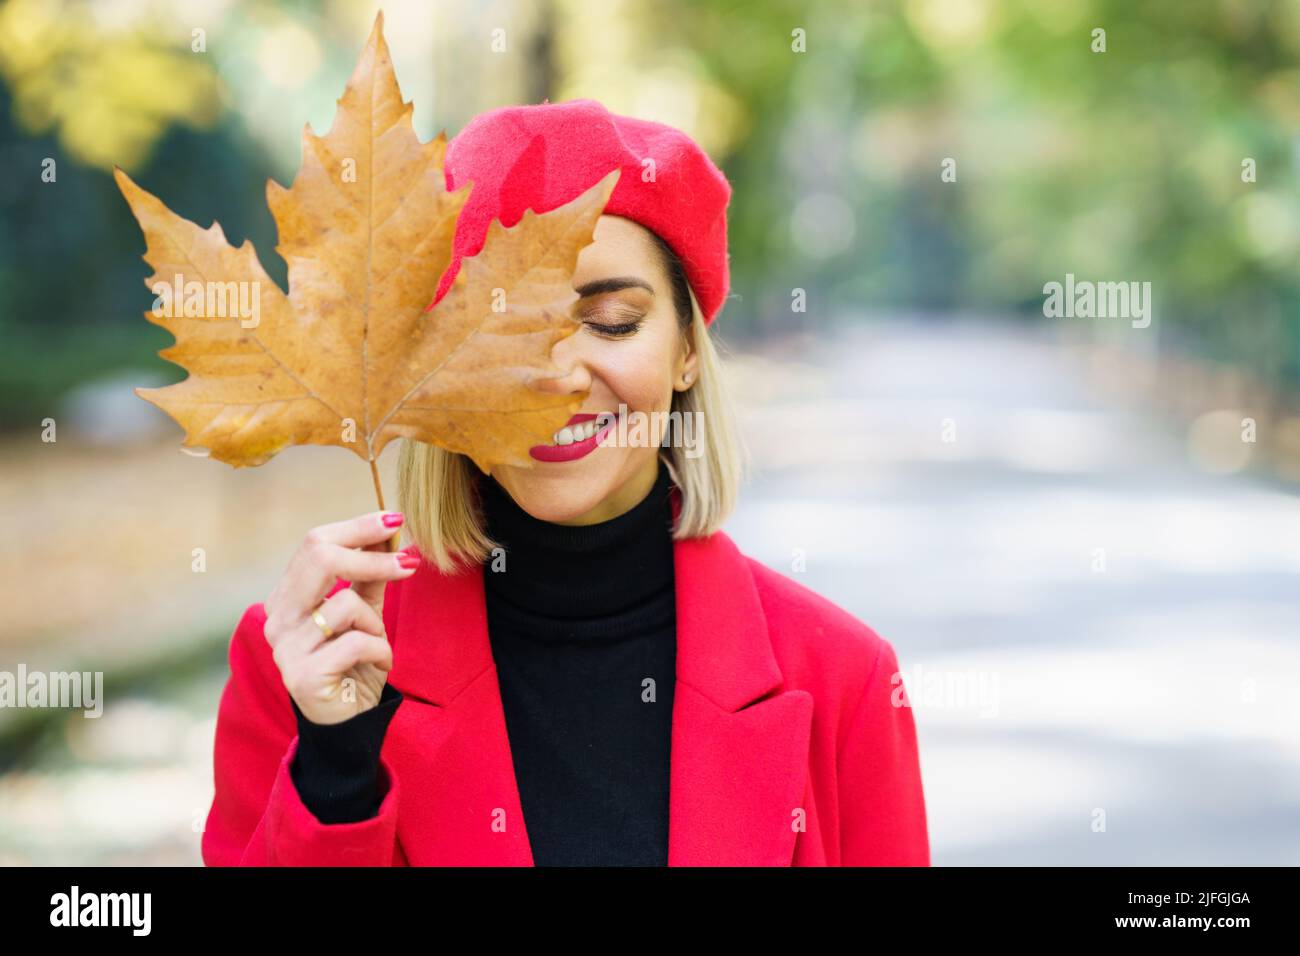 Smiling woman covering face with dry leaf Stock Photo